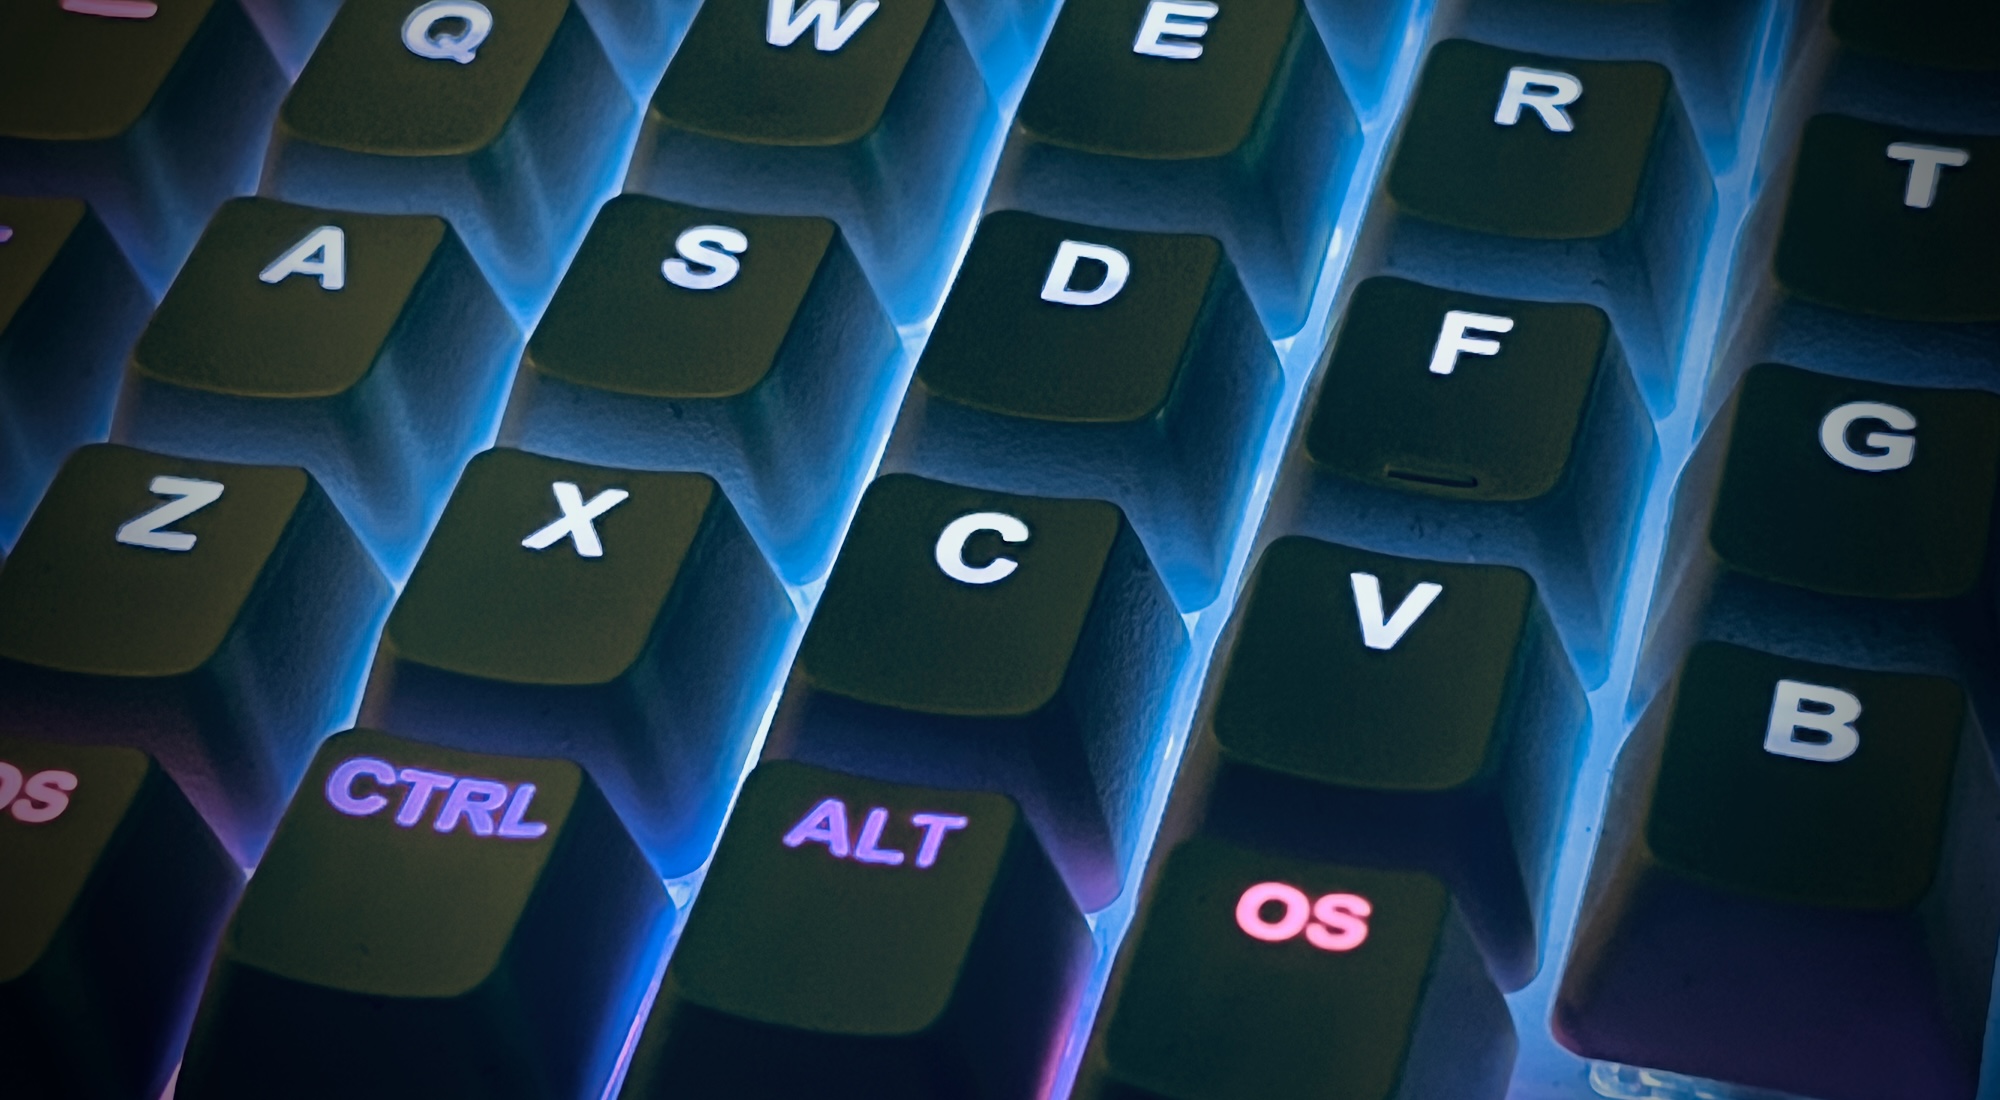 closeup photo of a computer keyboard with blue/pink backlighting